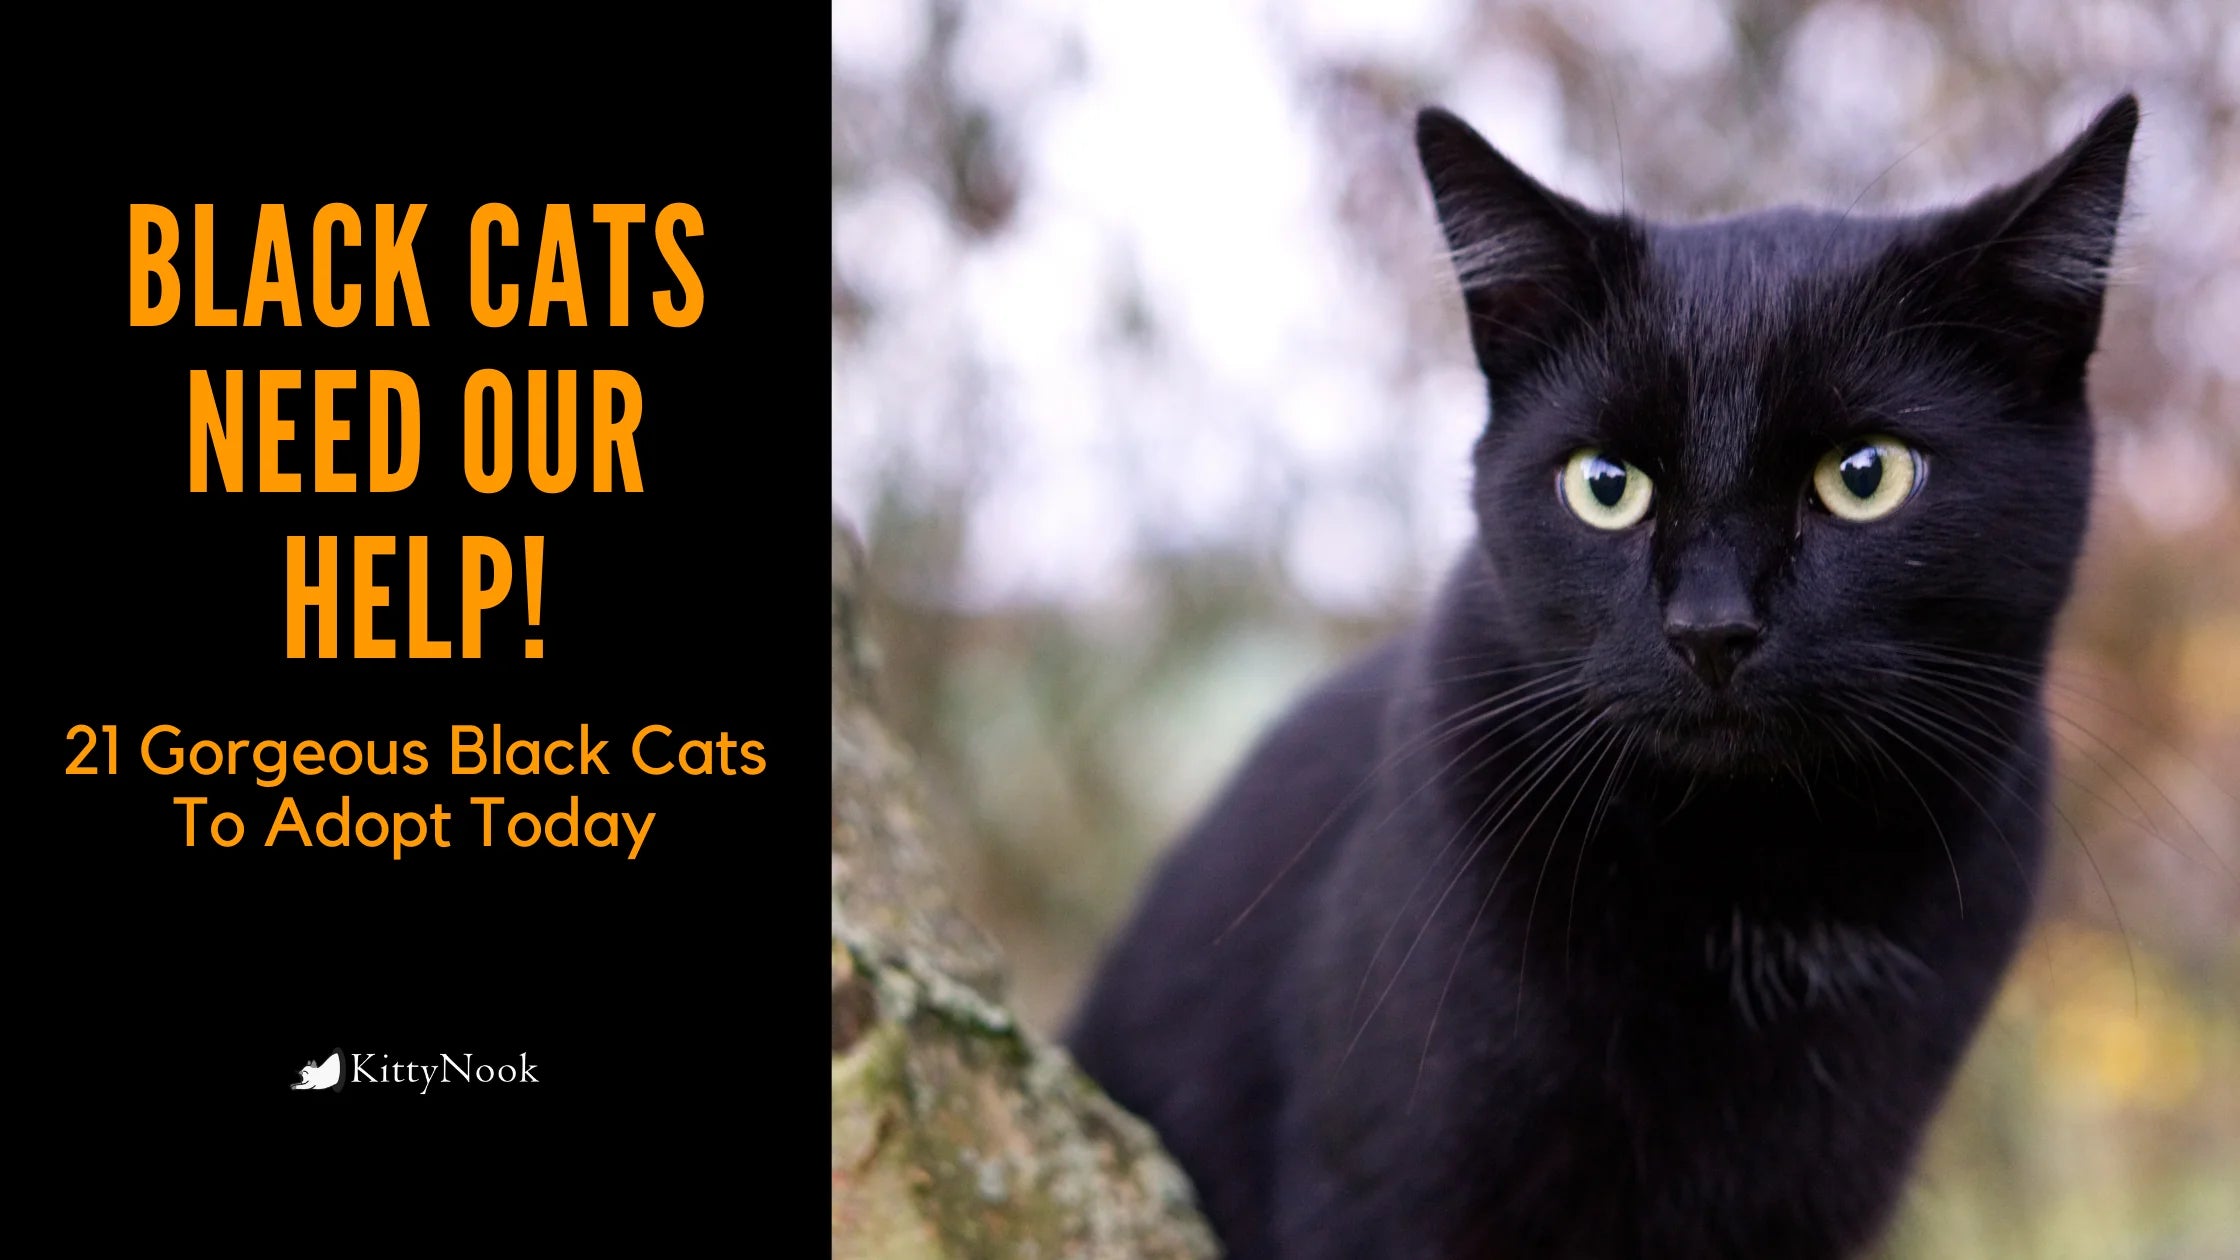 Black Cats Need Our Help! 21 Gorgeous Black Cats To Adopt Today - KittyNook Cat Company